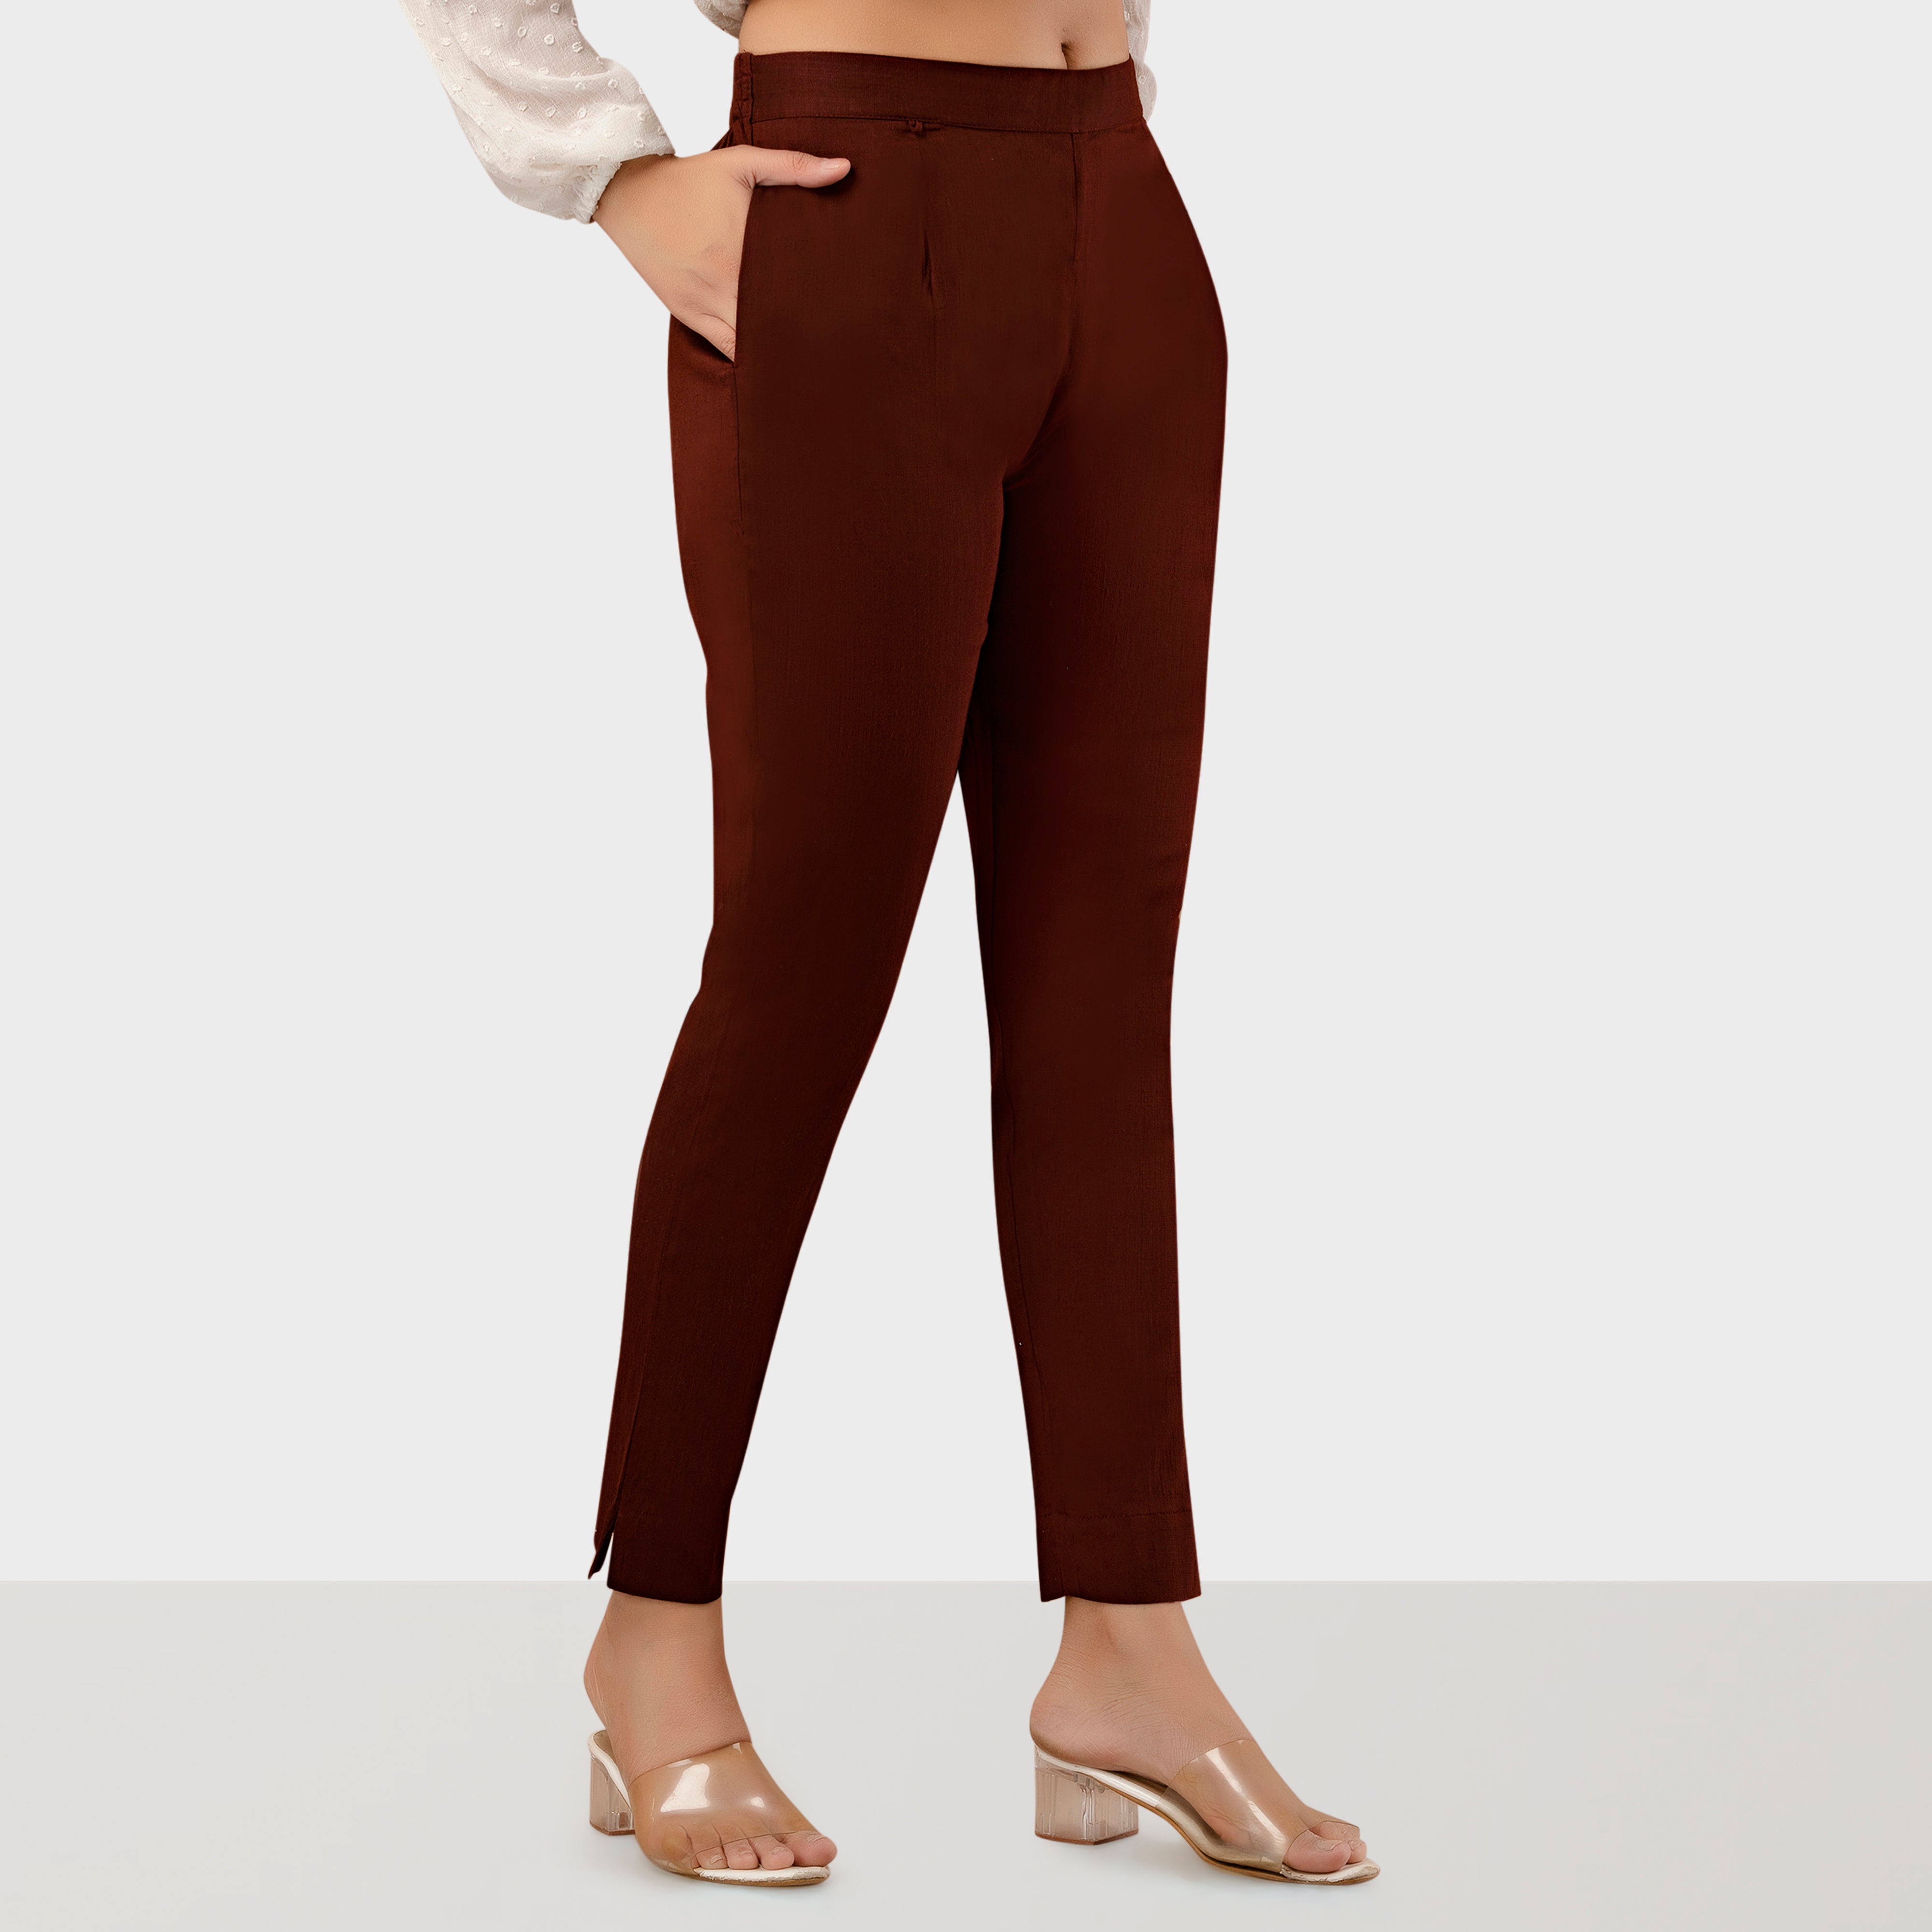 Buy Pant Cigarette Pants Women Girls/Ladies Relax Ankle Length Full Length  Stylish Regular fit Solid Western Slim fit for Outdoor Indore Stretchable  Sports Yoga Gym Party Fancy Latest (Medium, Maroon) at